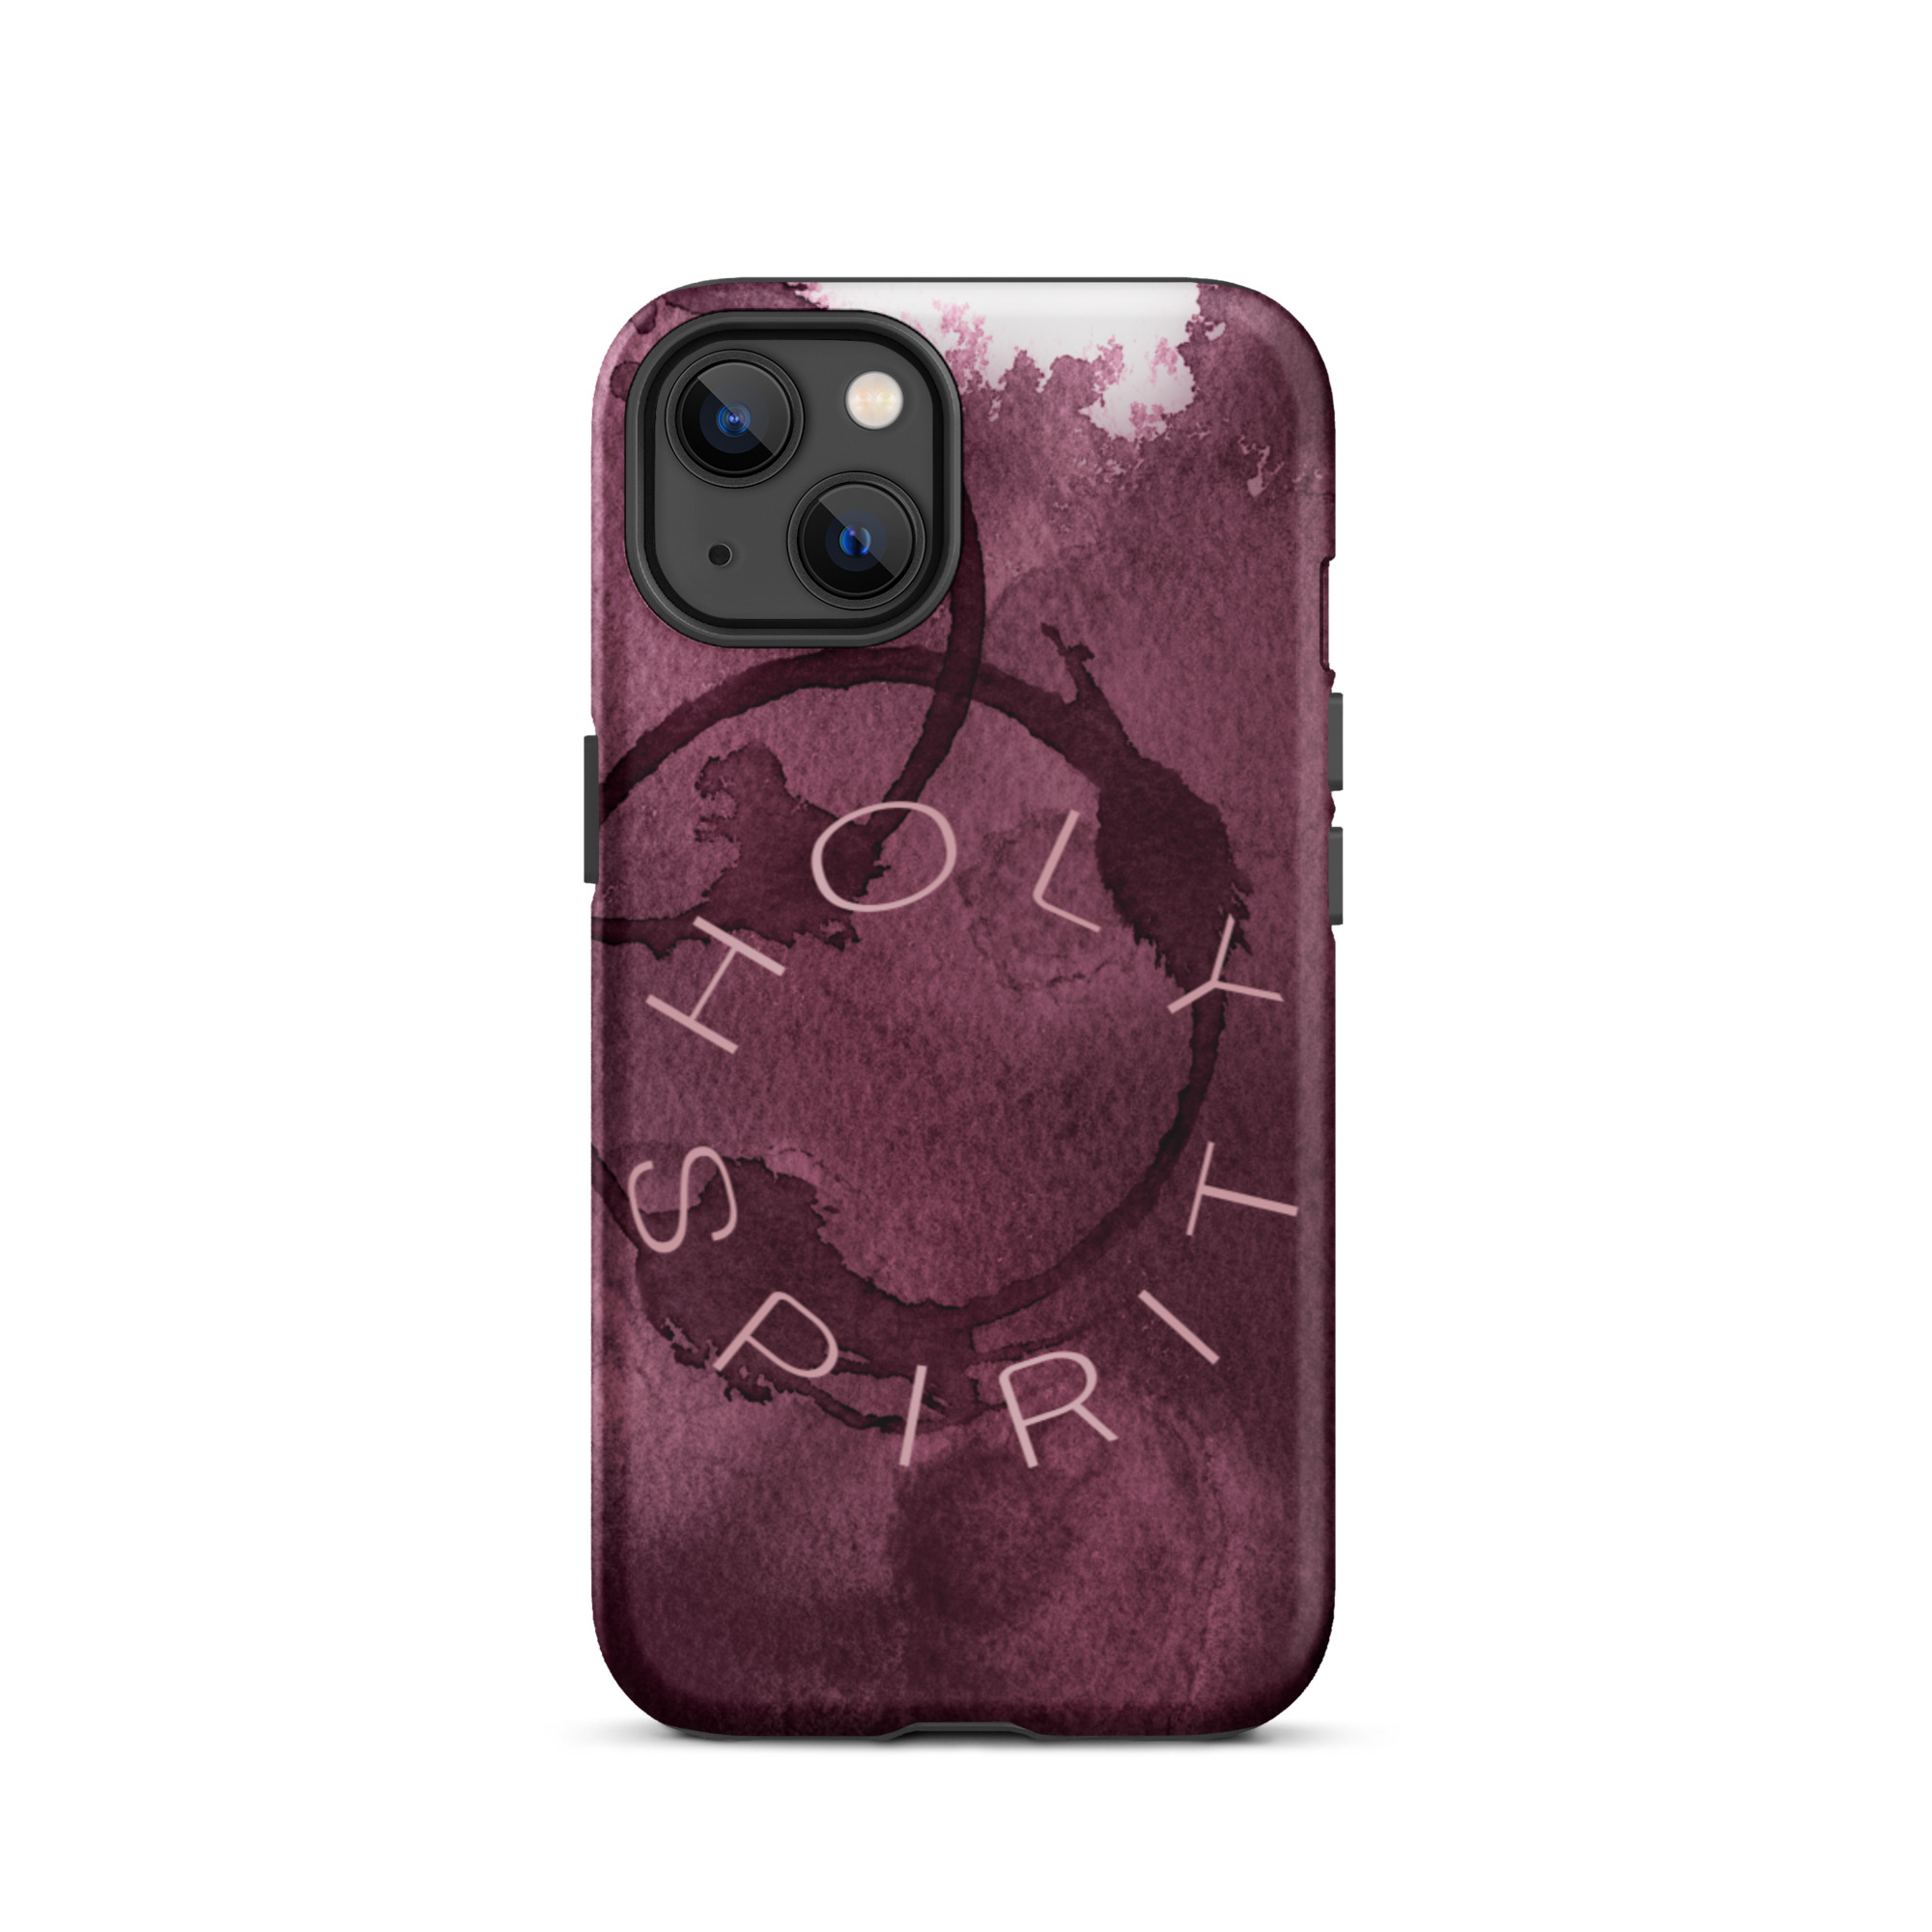 tough-iphone-case-glossy-iphone-13-front-637301ca2ca4d.jpg